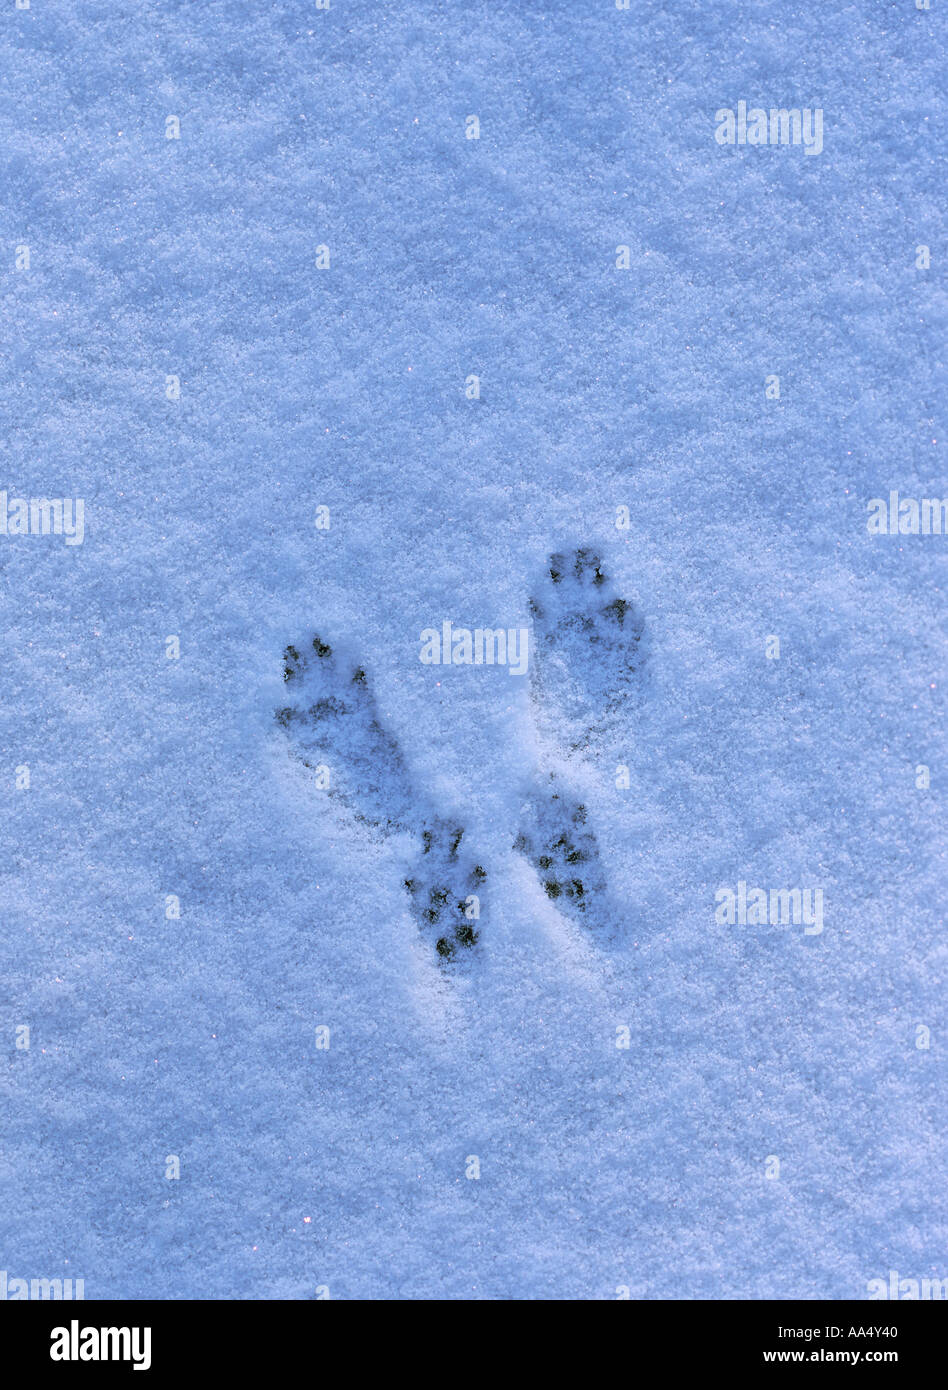 track of a squirrel in snow Stock Photo